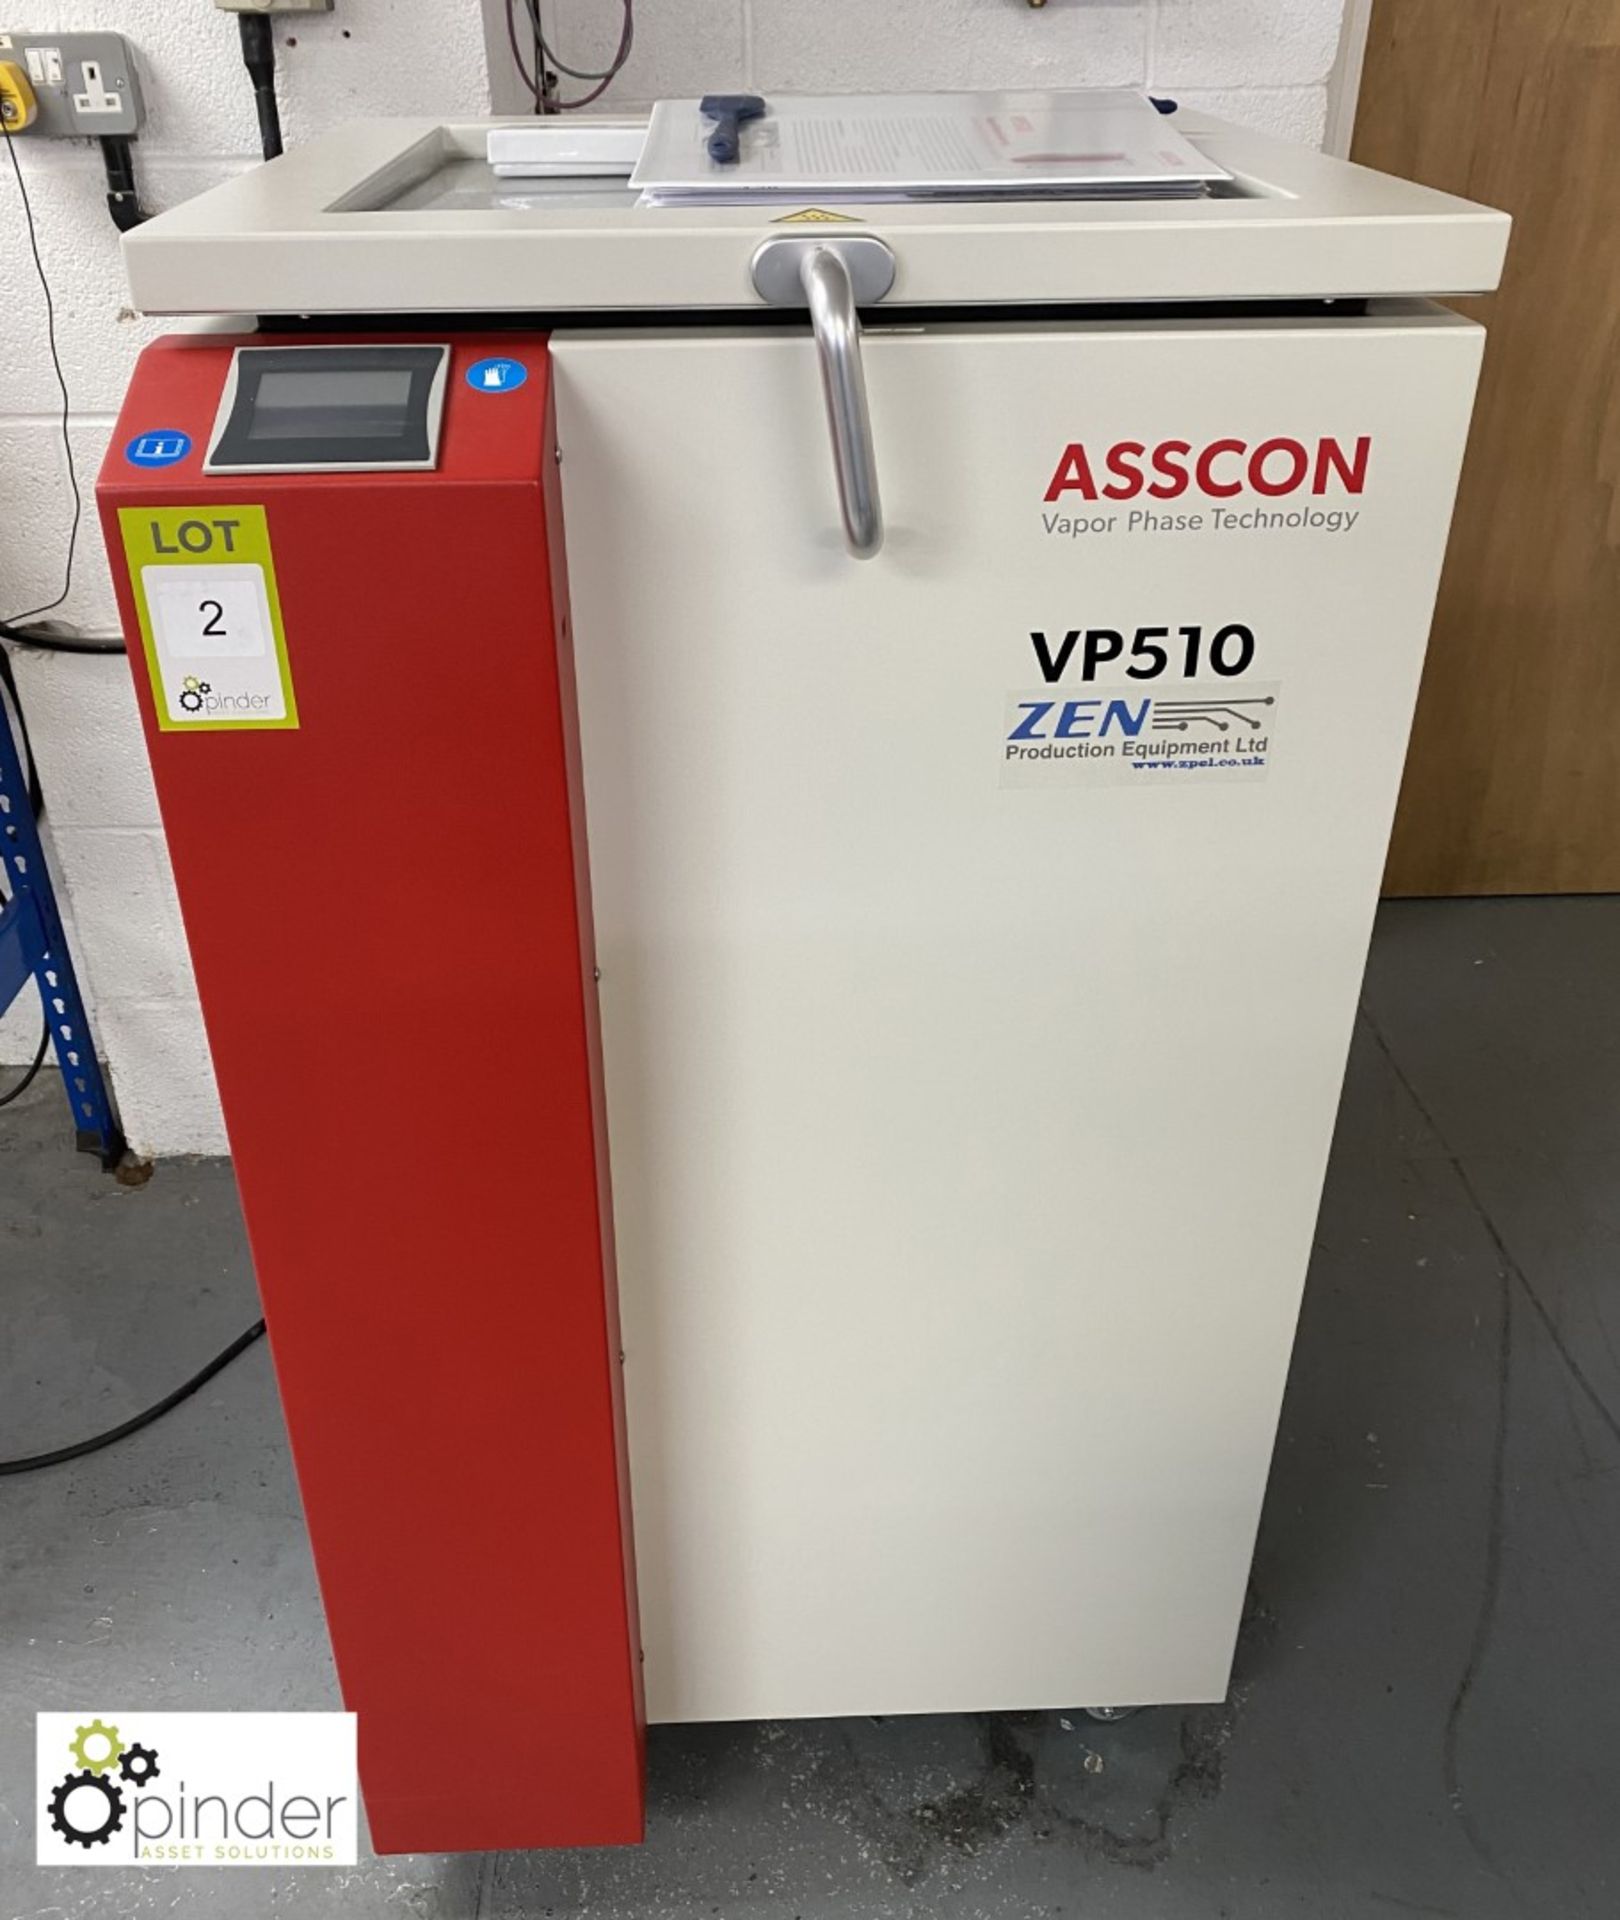 Asscon VP510 Vapour Phase Soldering Machine, year 2018, serial number 137